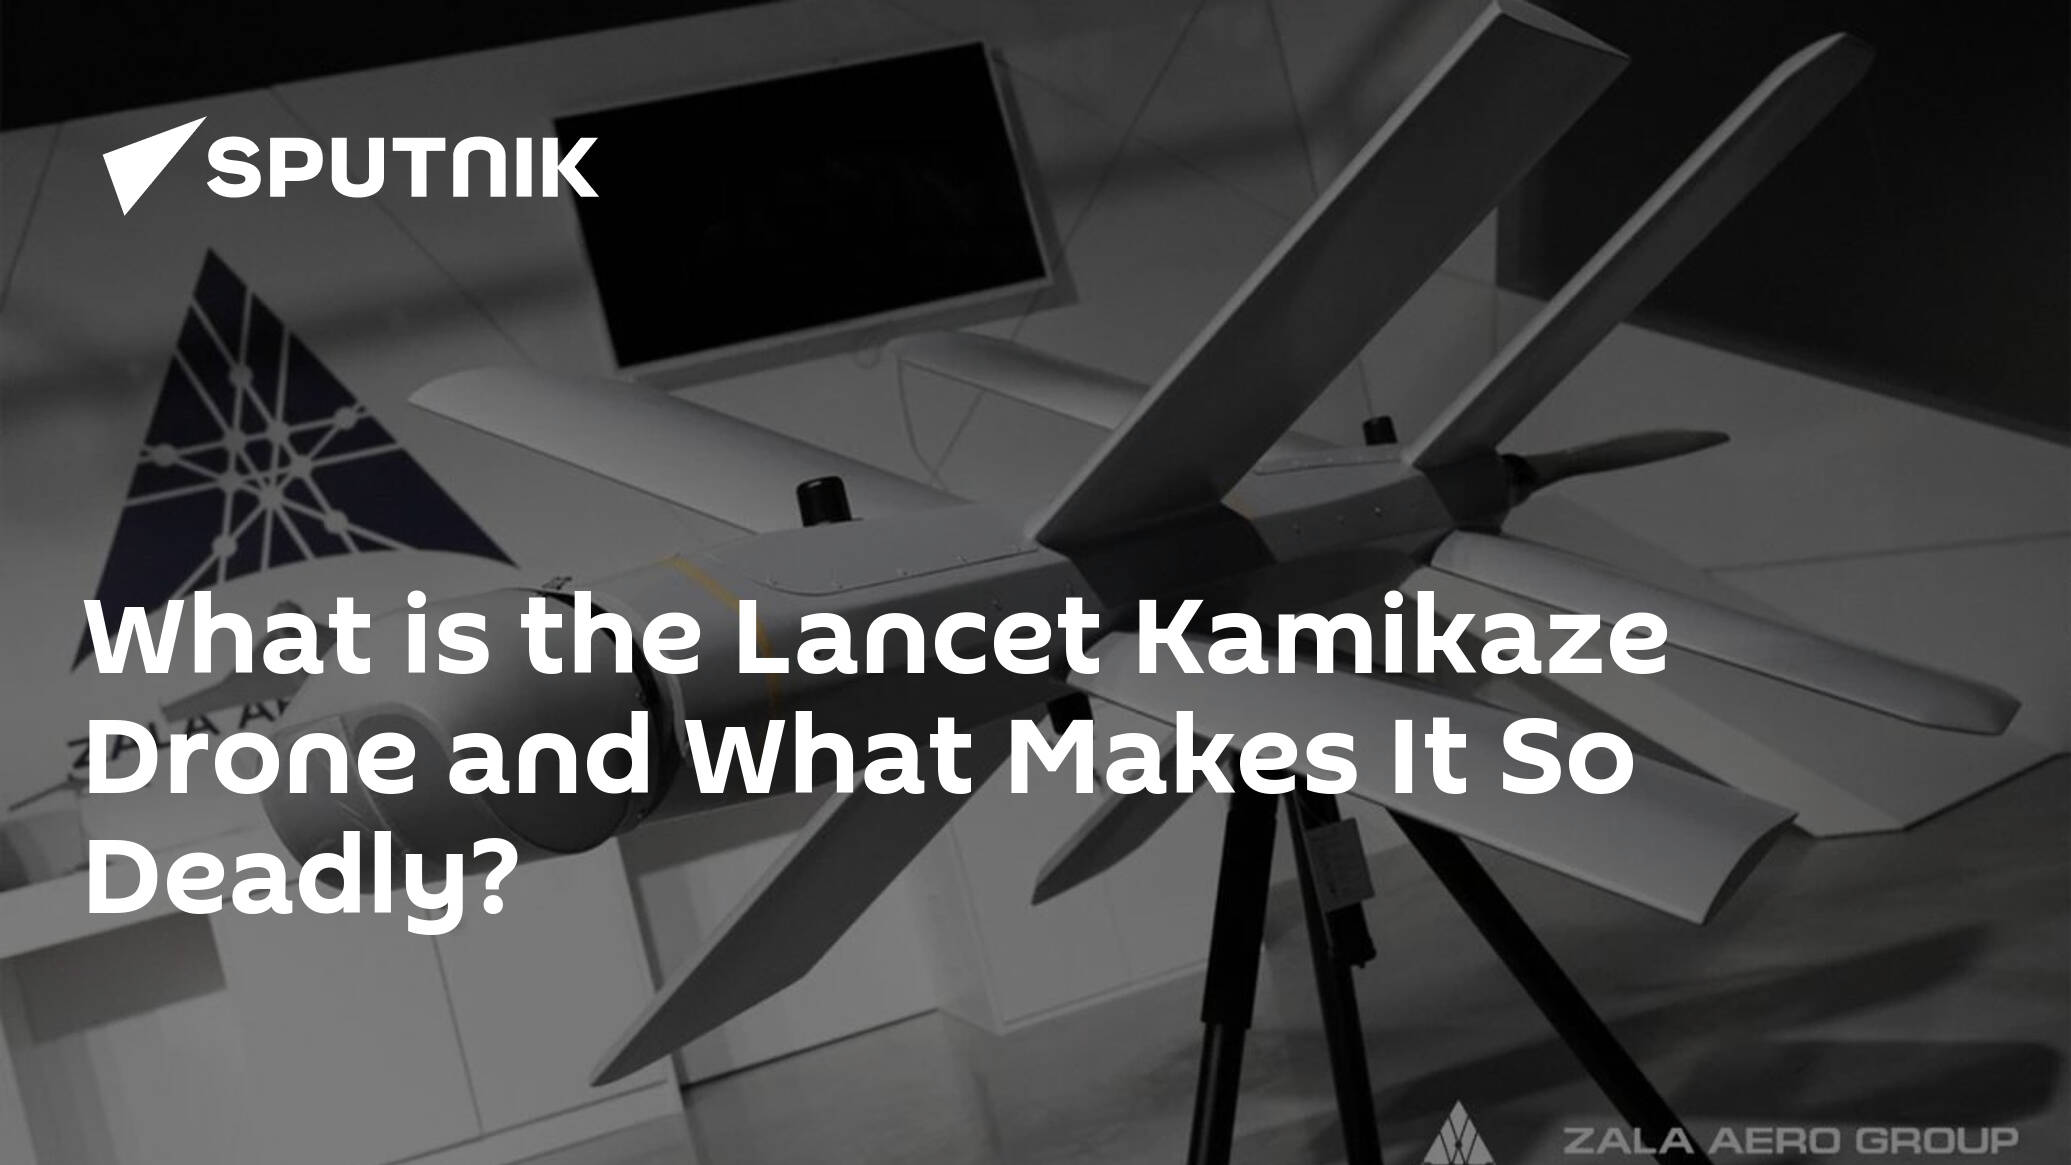 What is the Lancet Kamikaze Drone and What Makes It So Deadly?